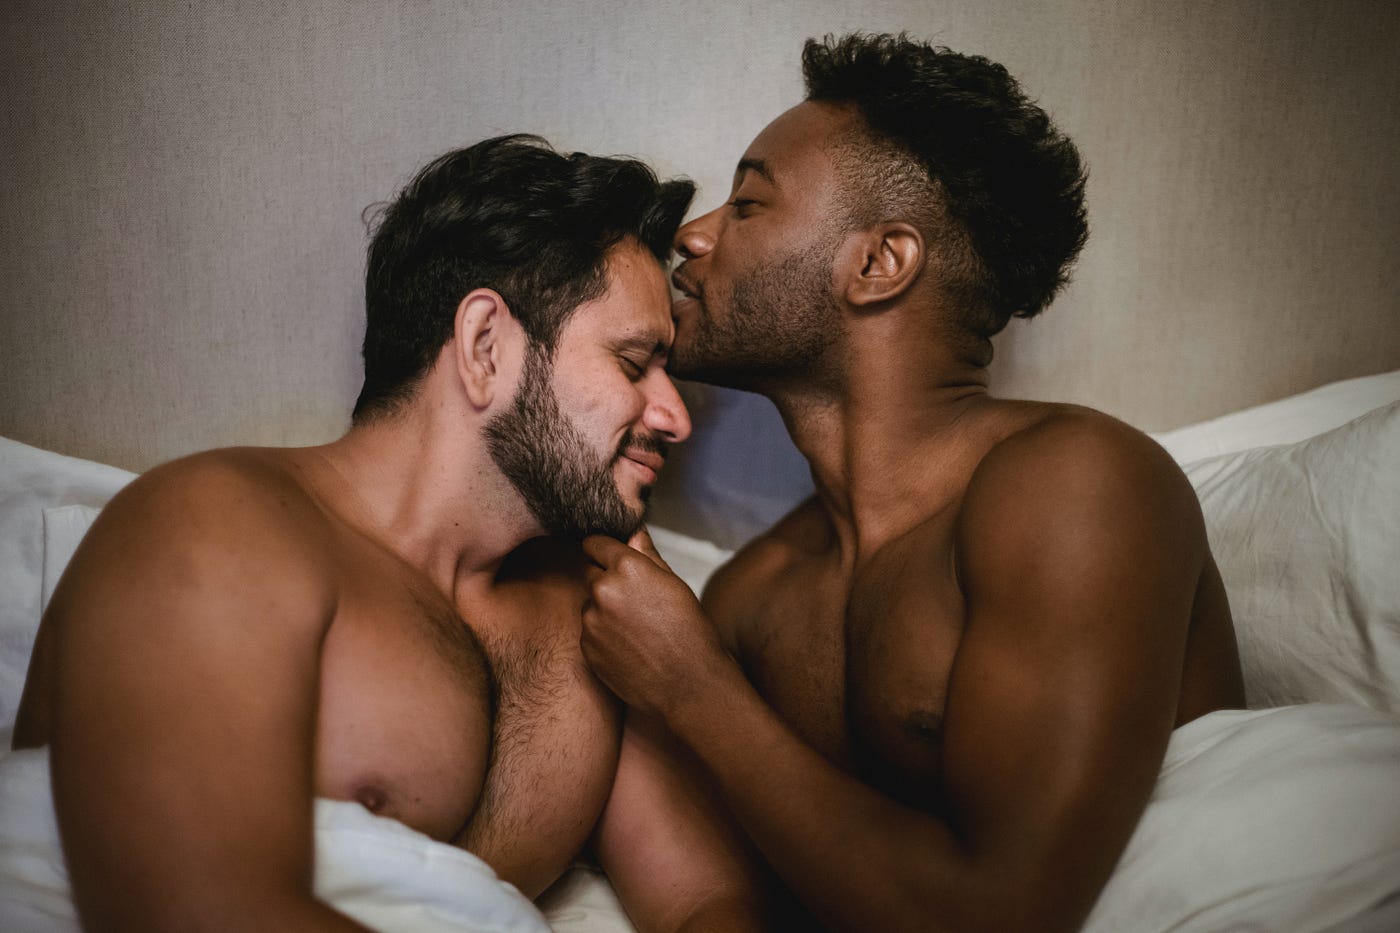 Zzgay - Why Women Are Turning To Gay Porn for Sexual Pleasure According to Science  | by Dona Mwiria | Sexography | Medium